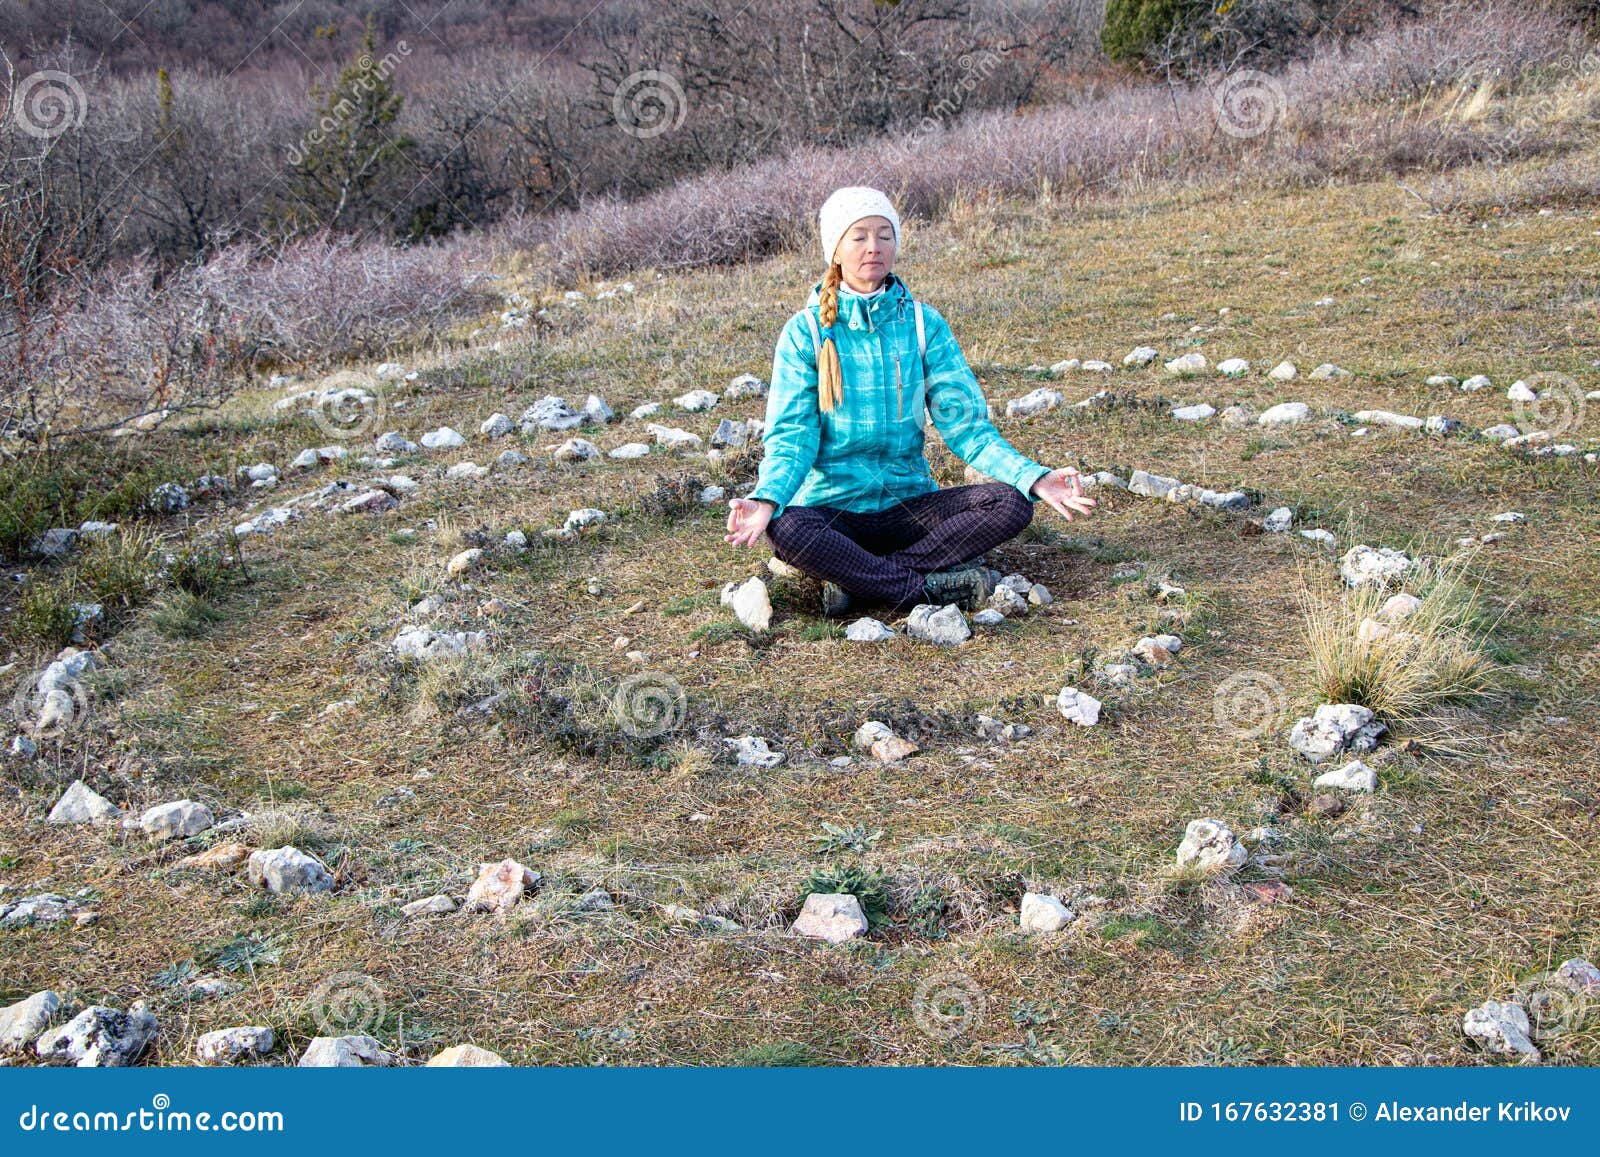 Mature Woman Practices Yoga in the Center of a Spiral Laid Out of ...